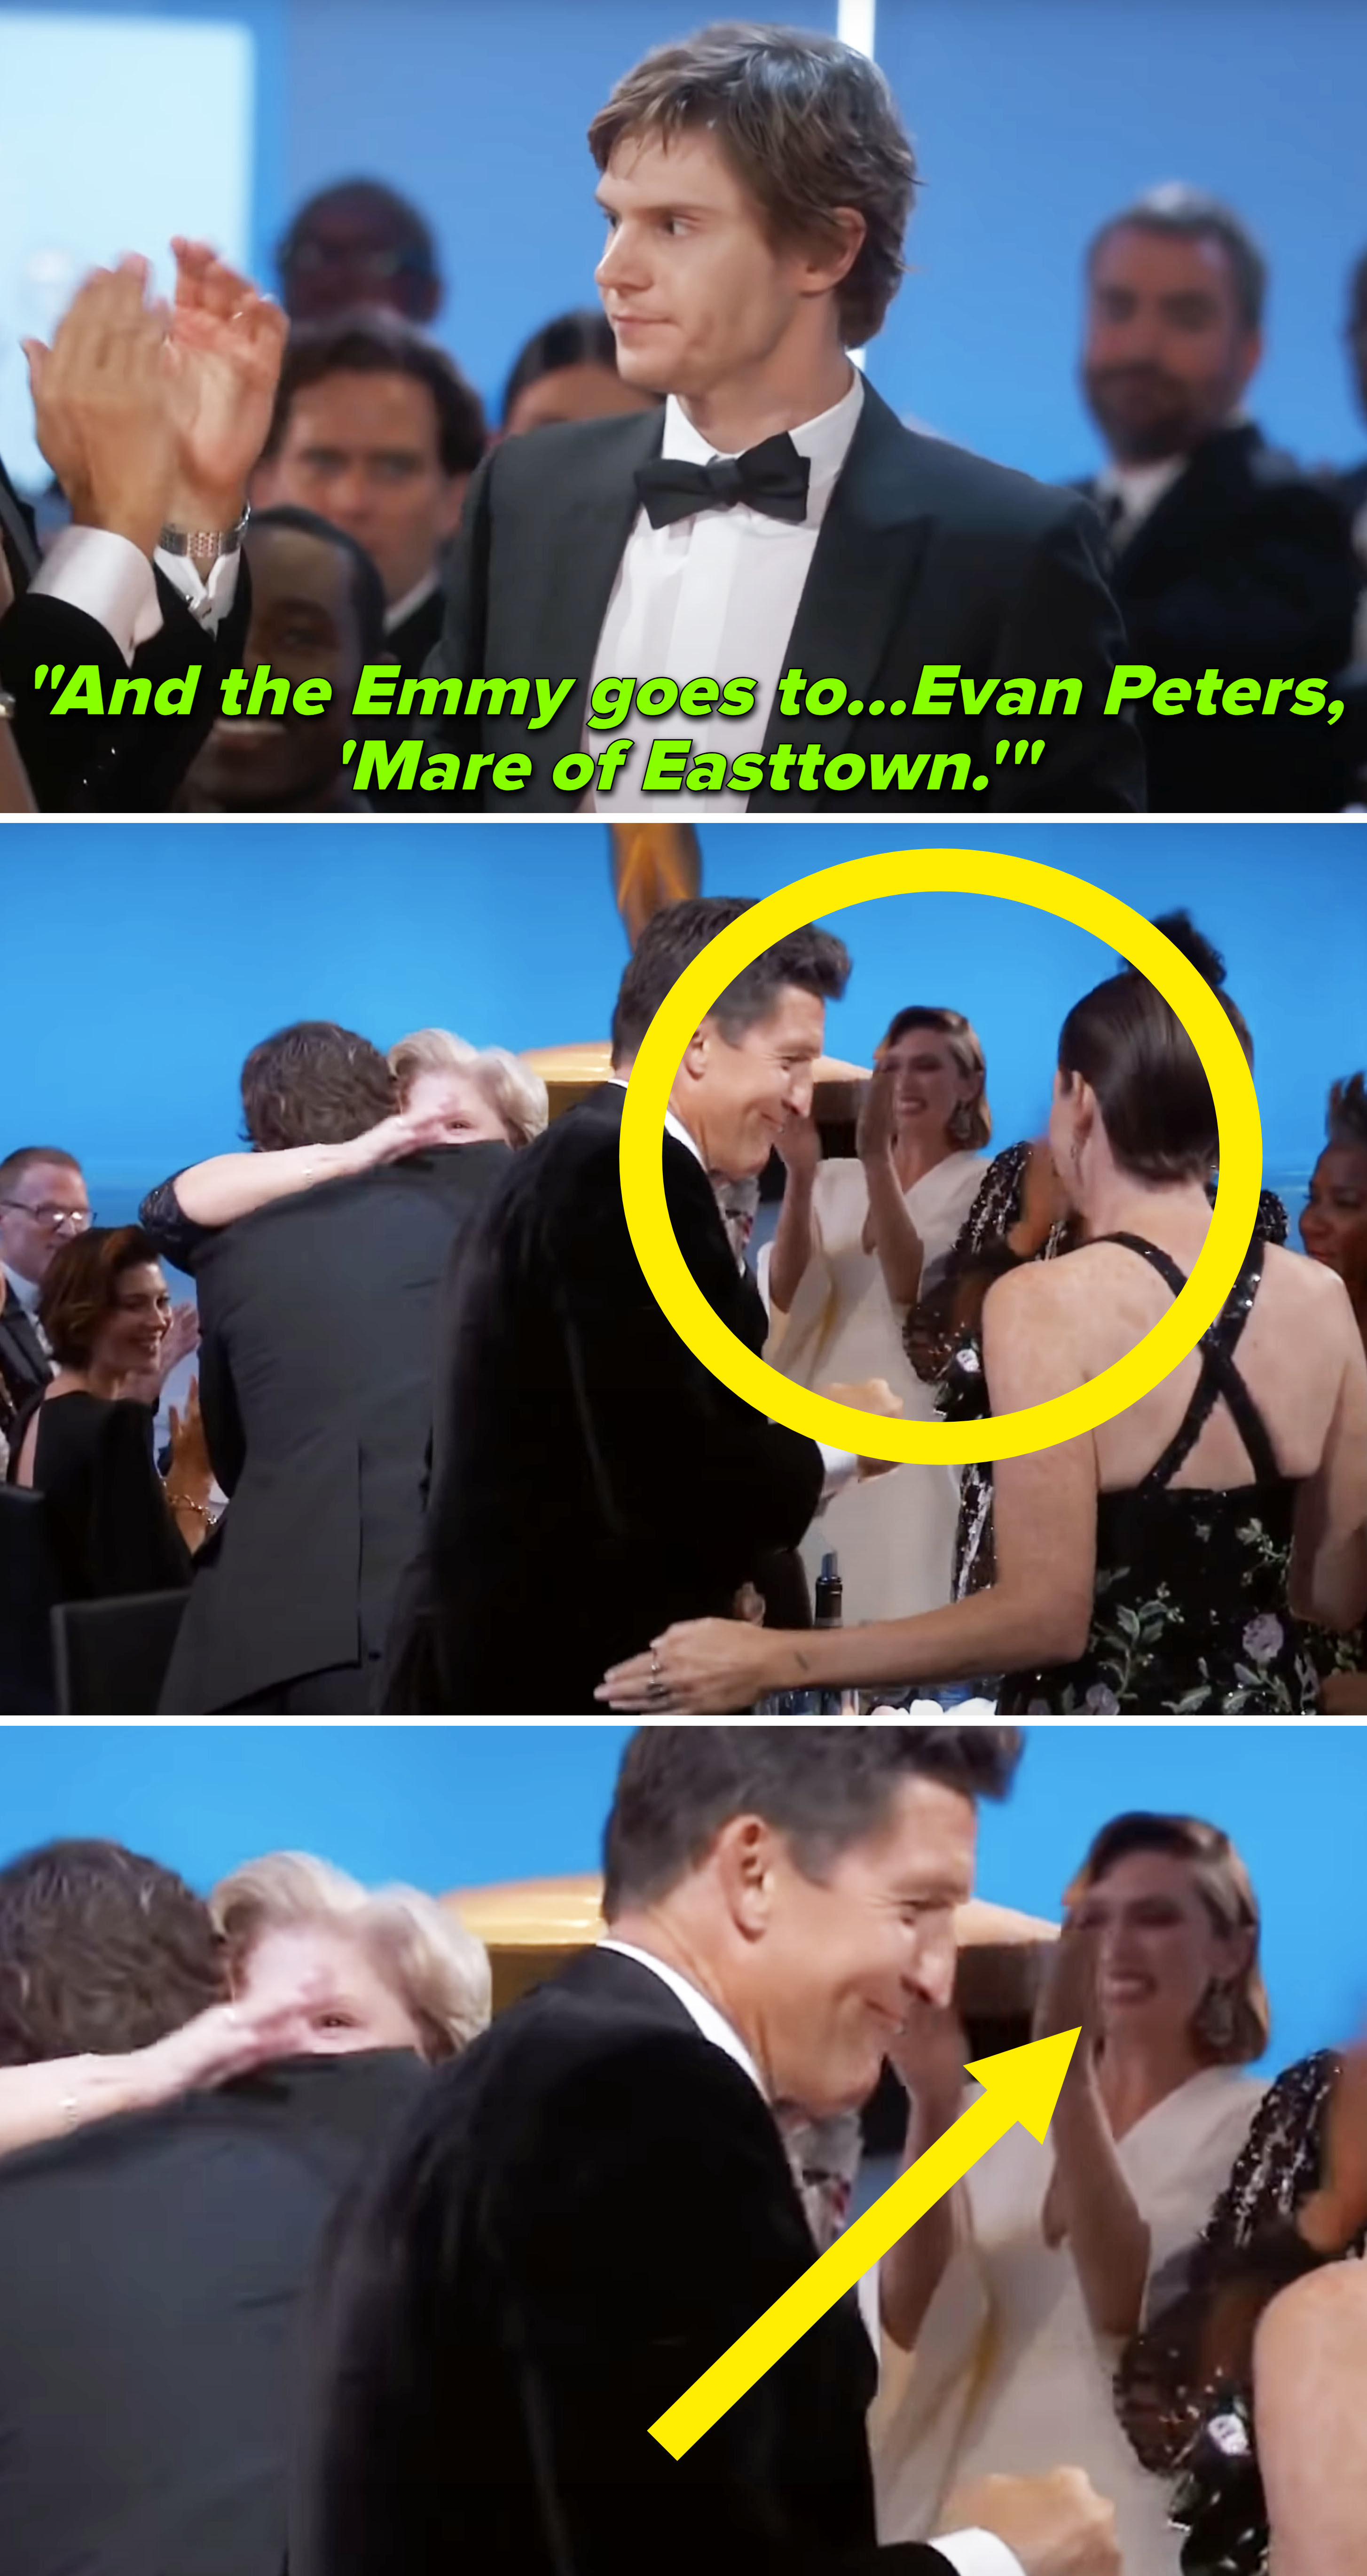 Elizabeth Olsen clapping in the audience as Evan Peters won an Emmy for &quot;Mare of Easttown.&quot;